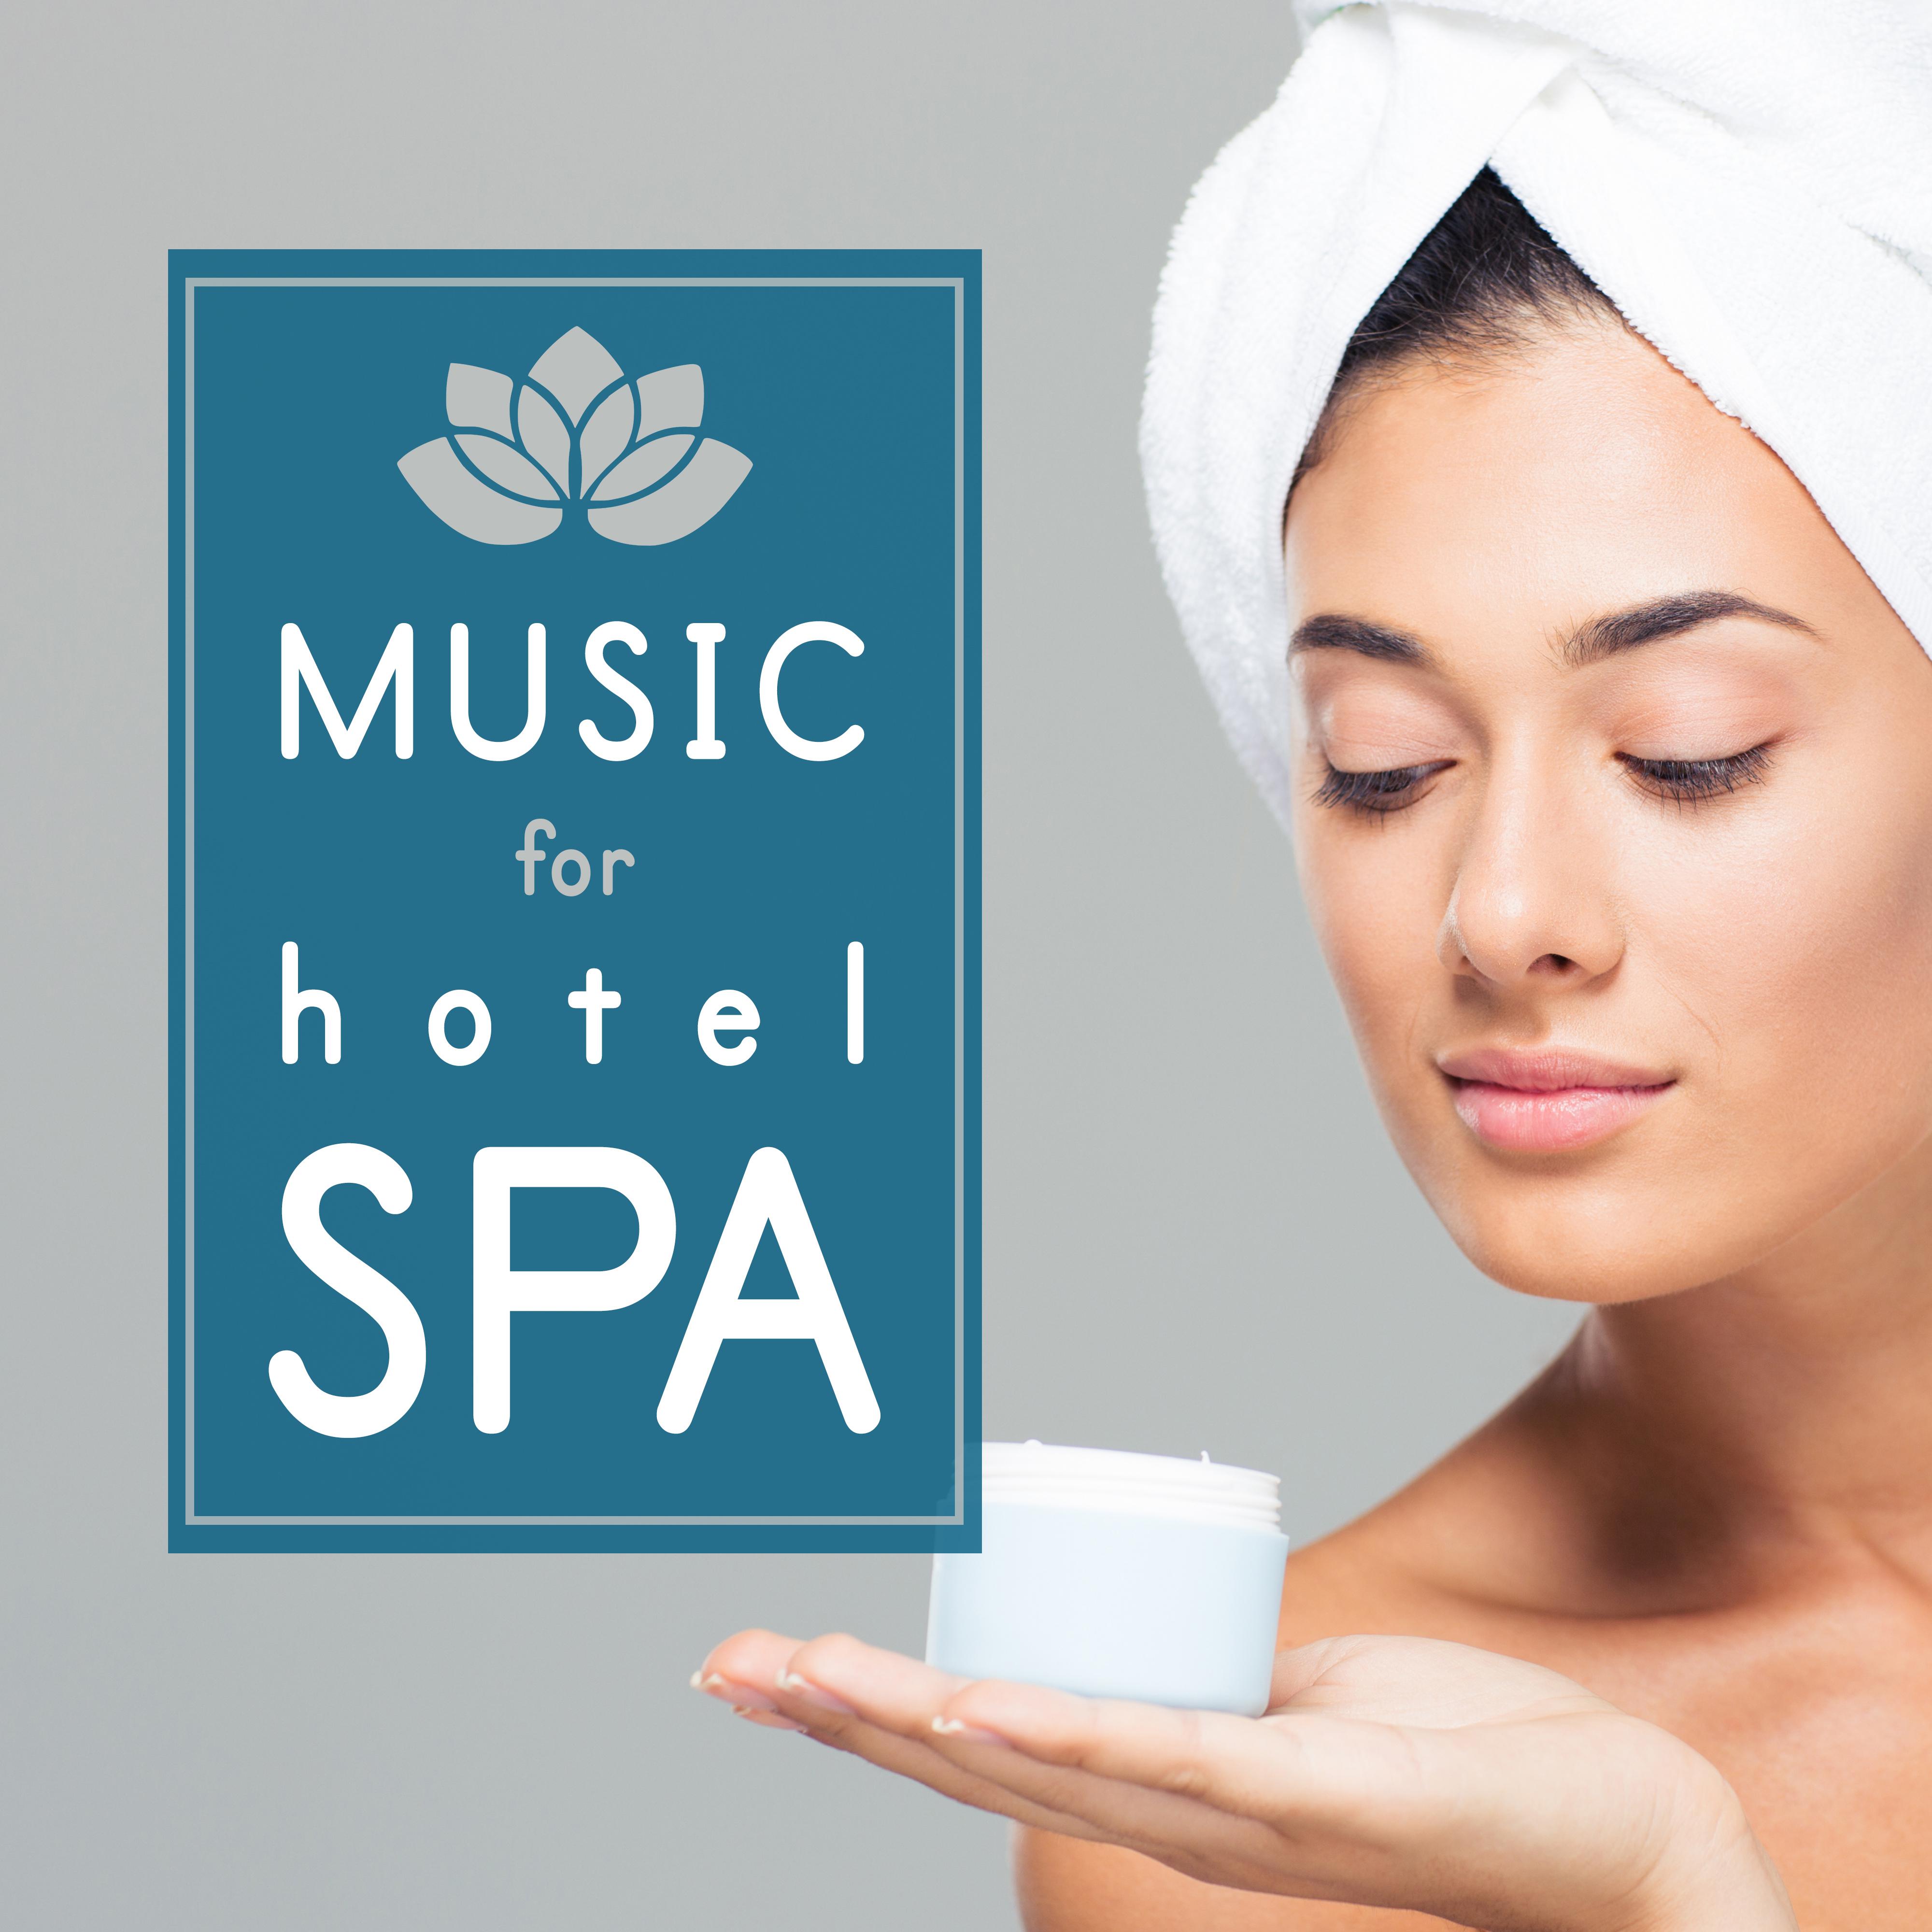 Music for Hotel Spa – Nature Music for Spa, New Age Sounds, Music for Background to Massage, Natural Sounds, Pure Relax